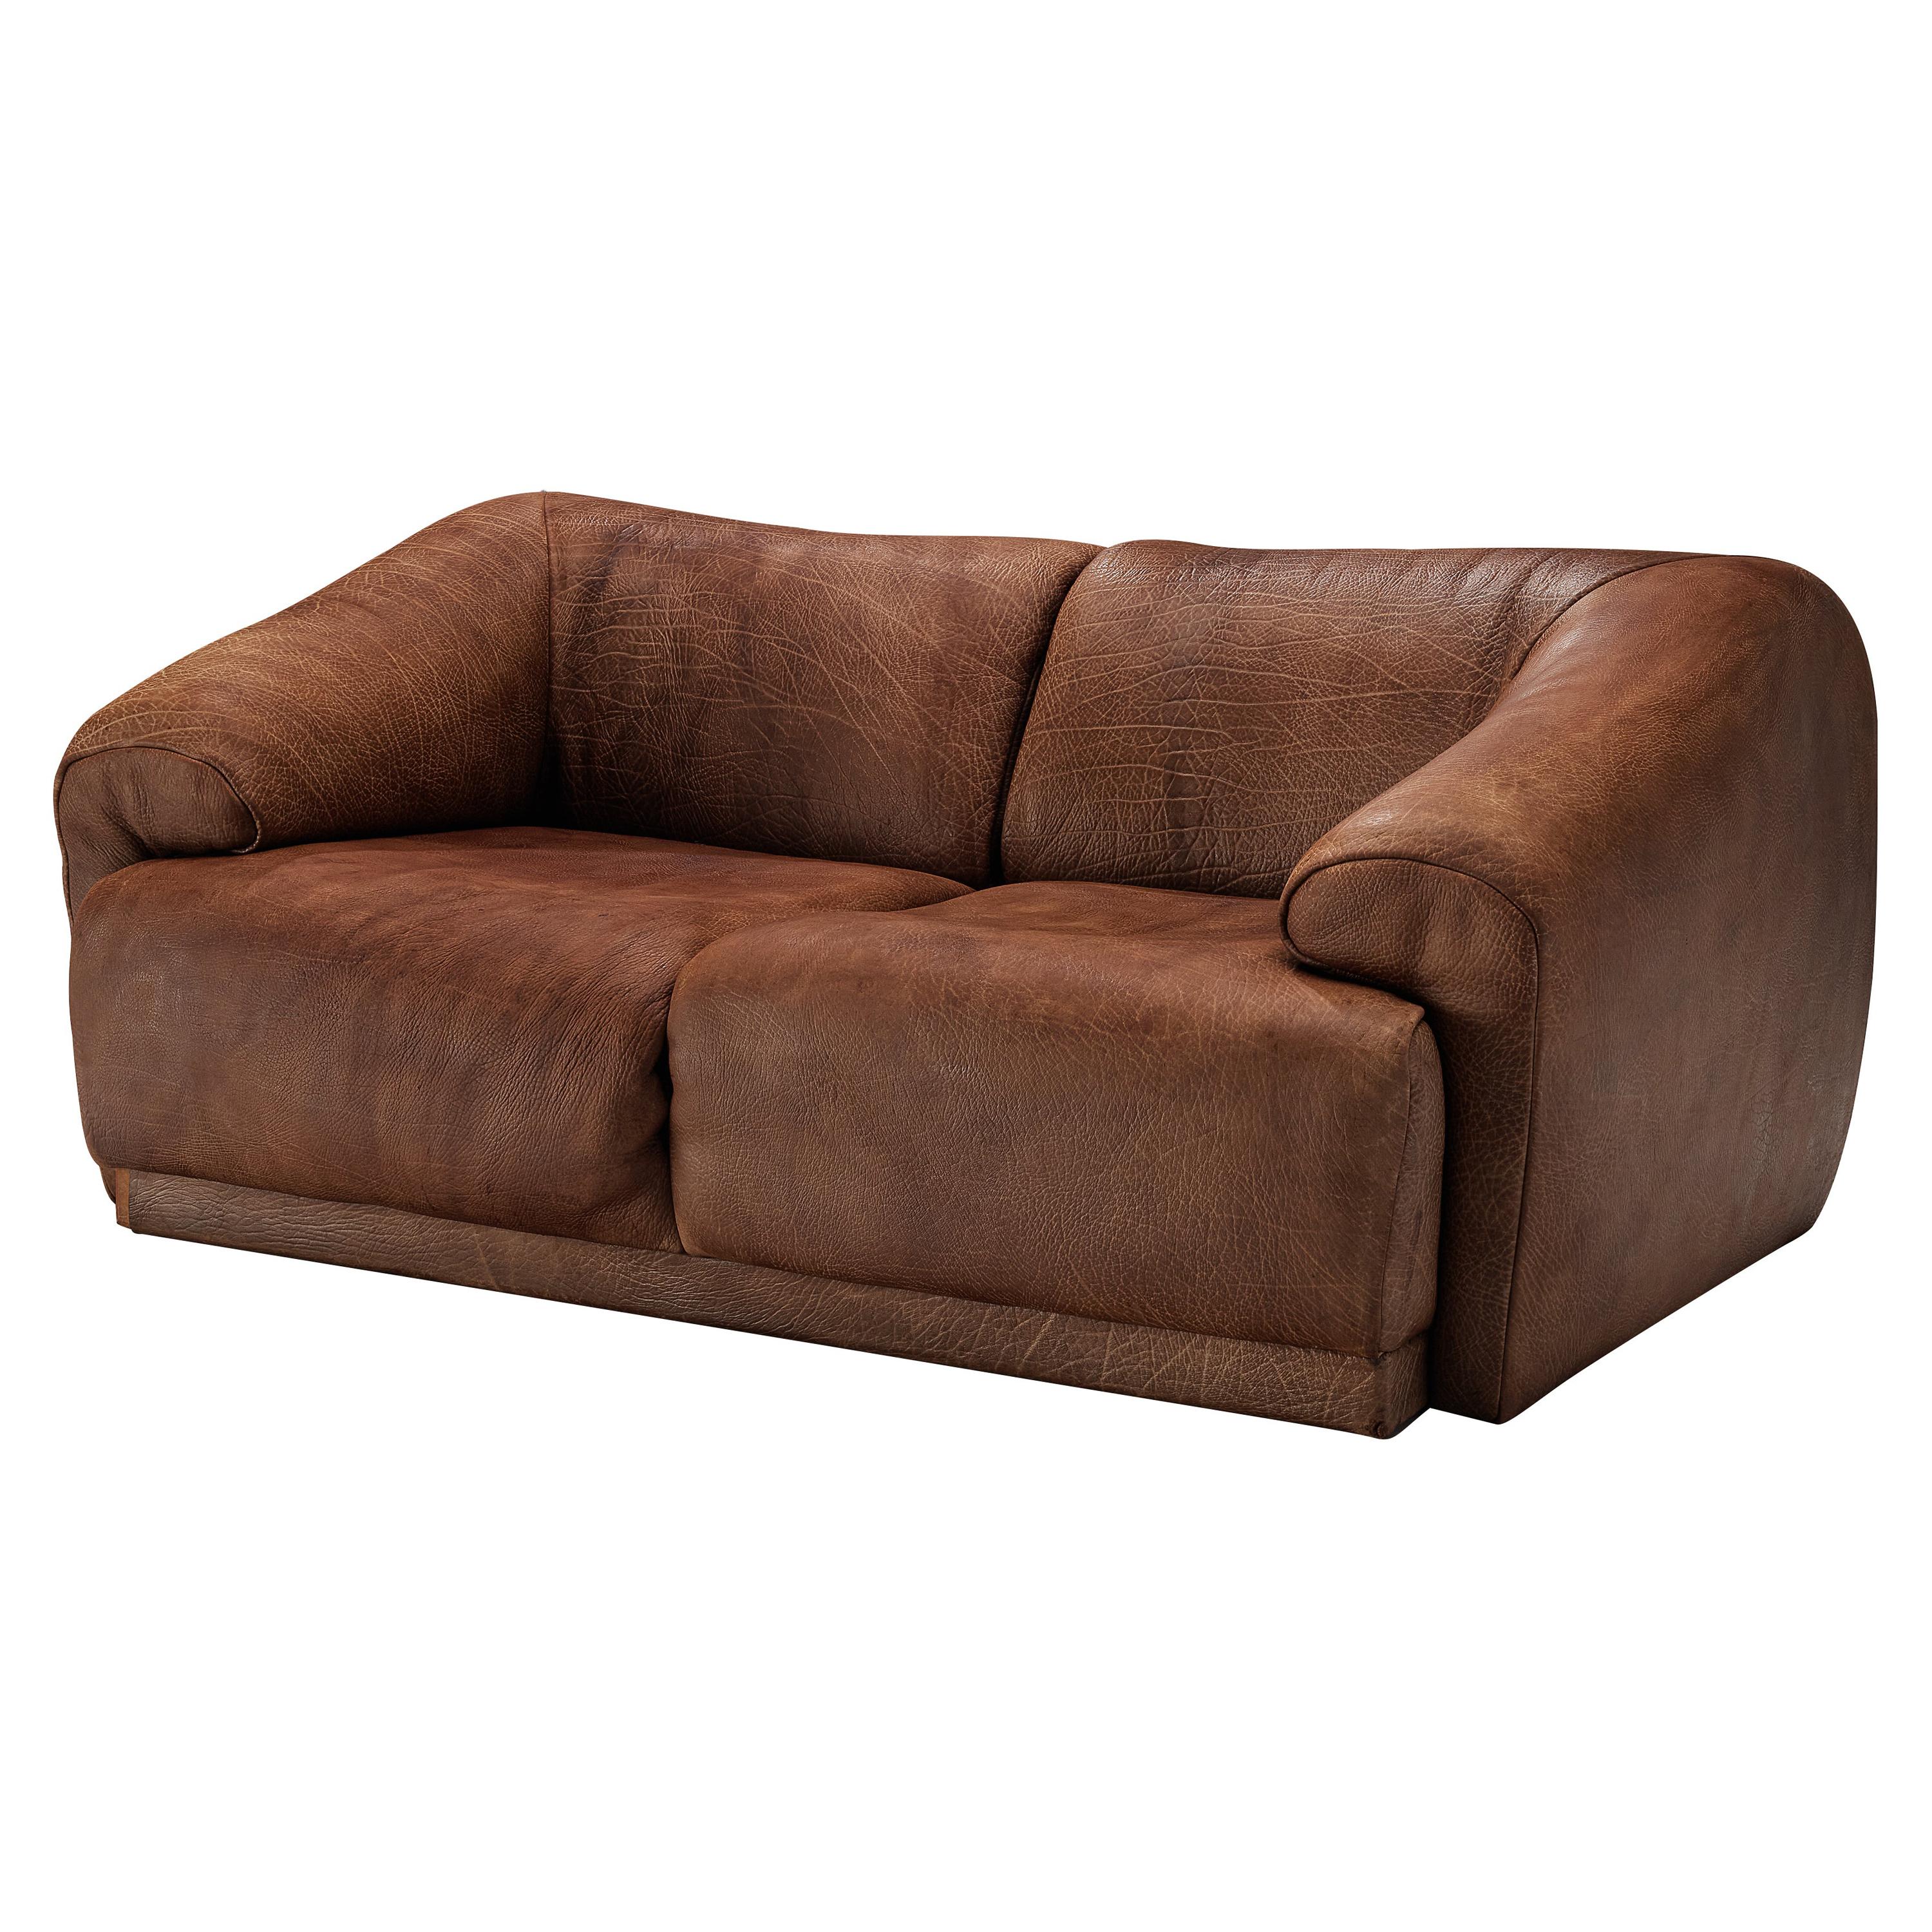 De Sede Two Seat Sofa in Brown Leather